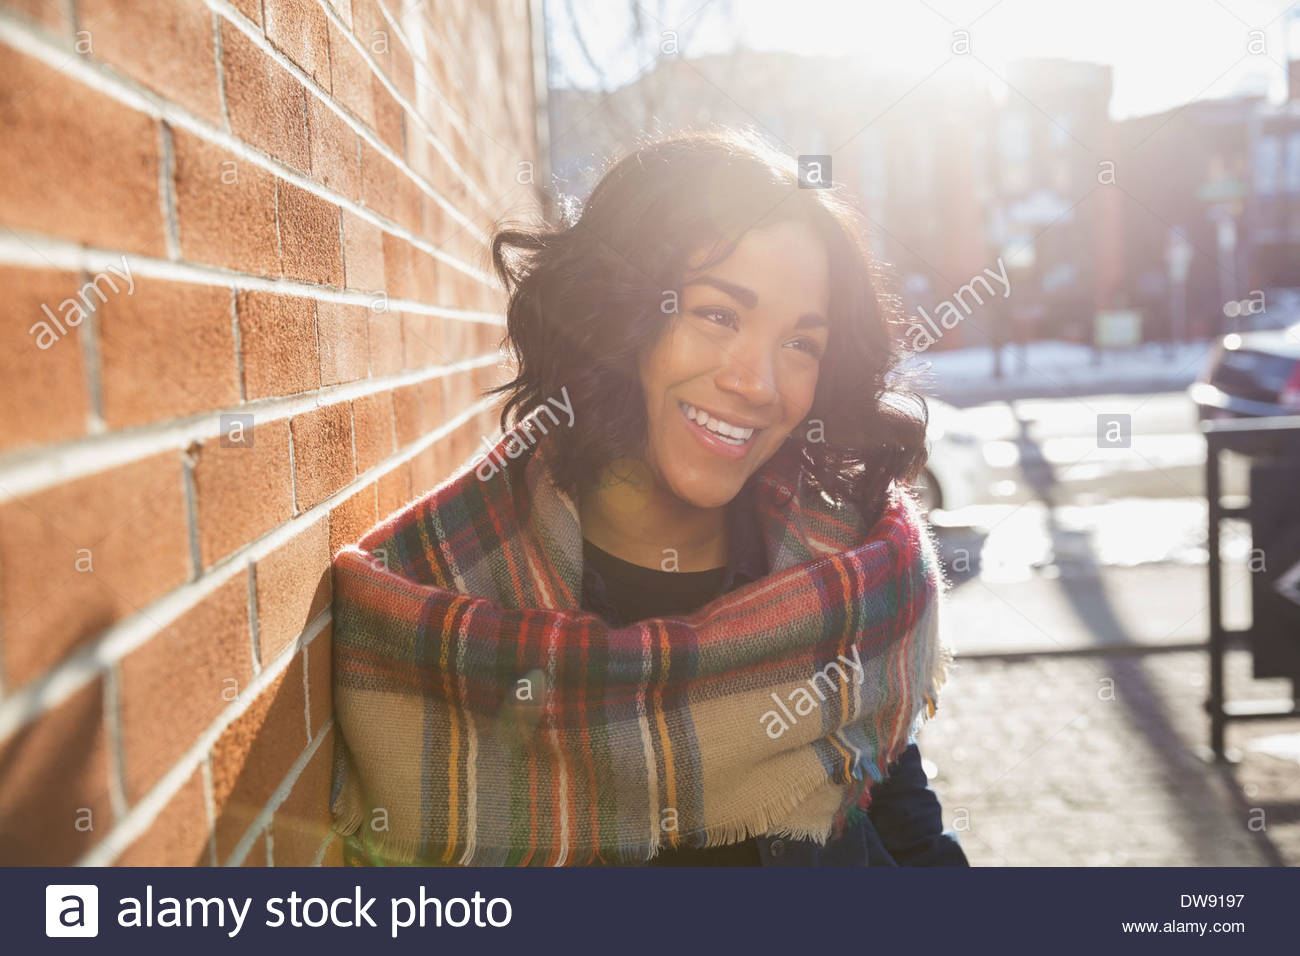 Smiling woman standing by brick wall Banque D'Images